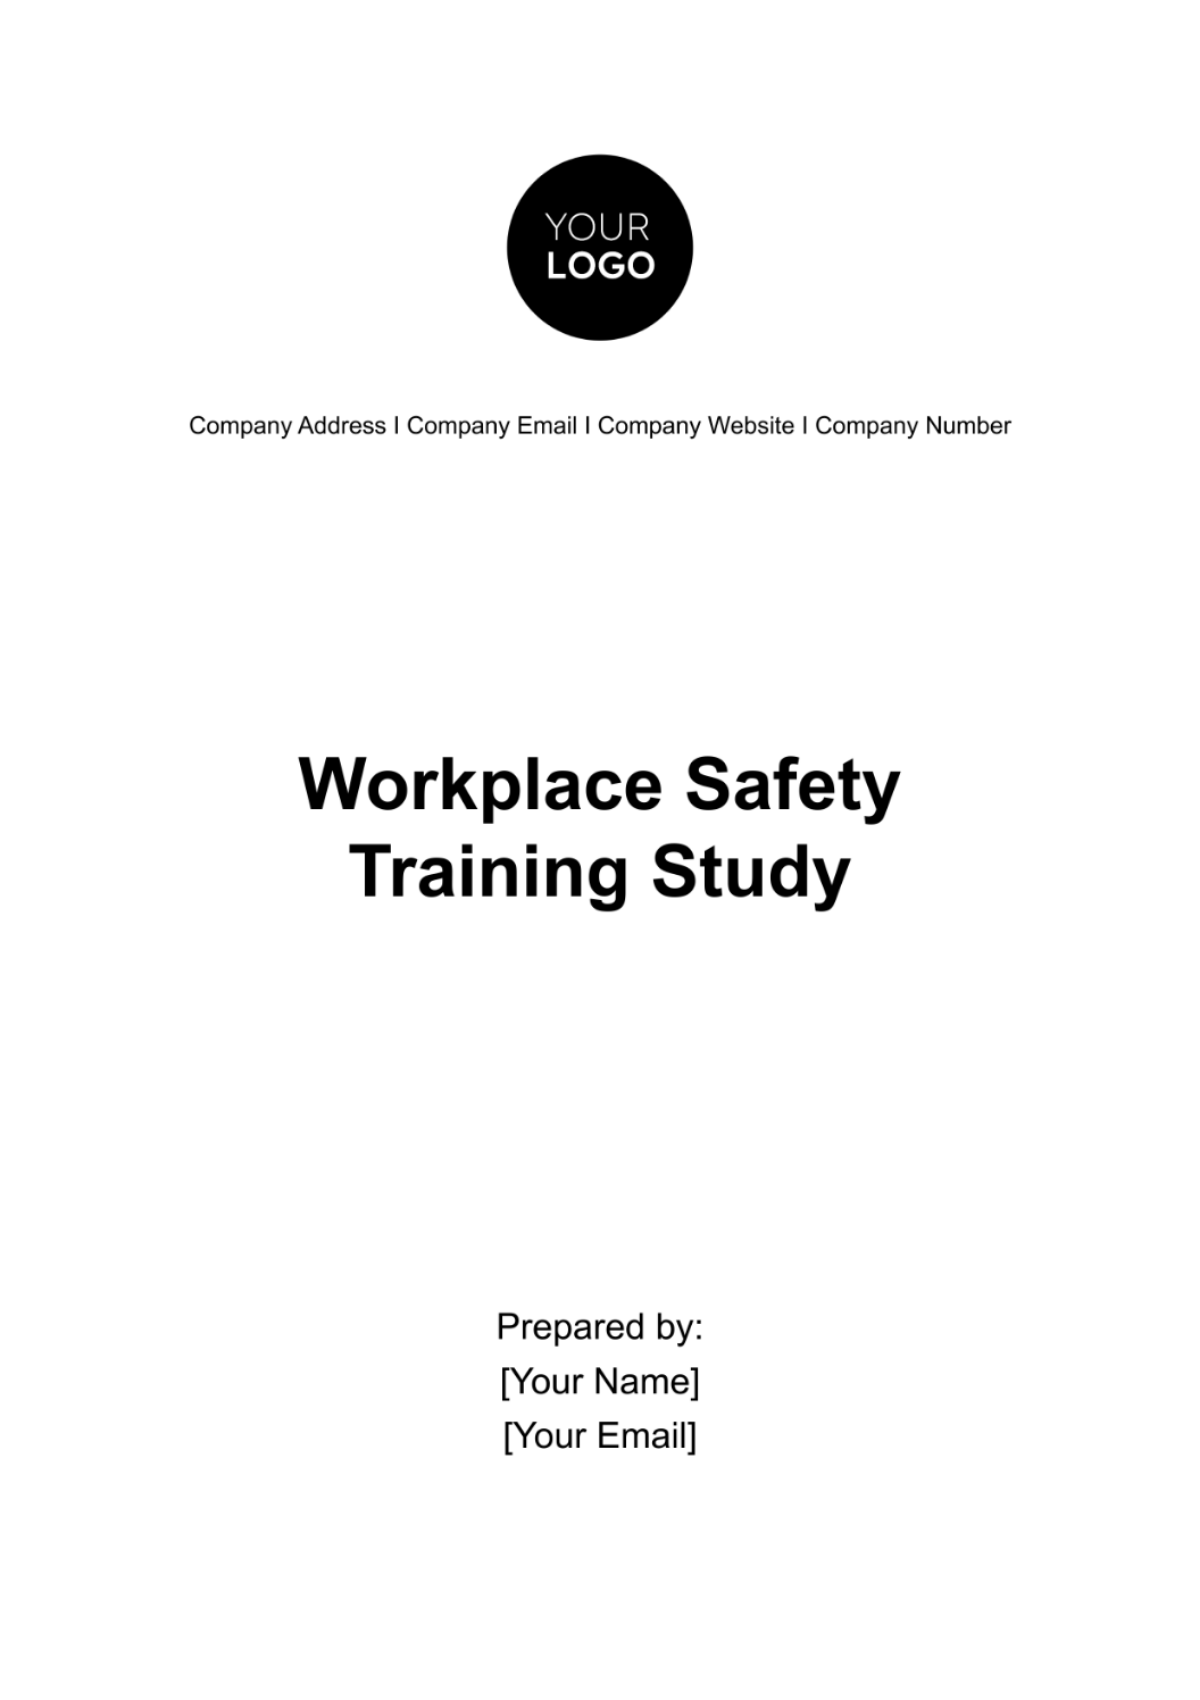 Workplace Safety Training Study Template